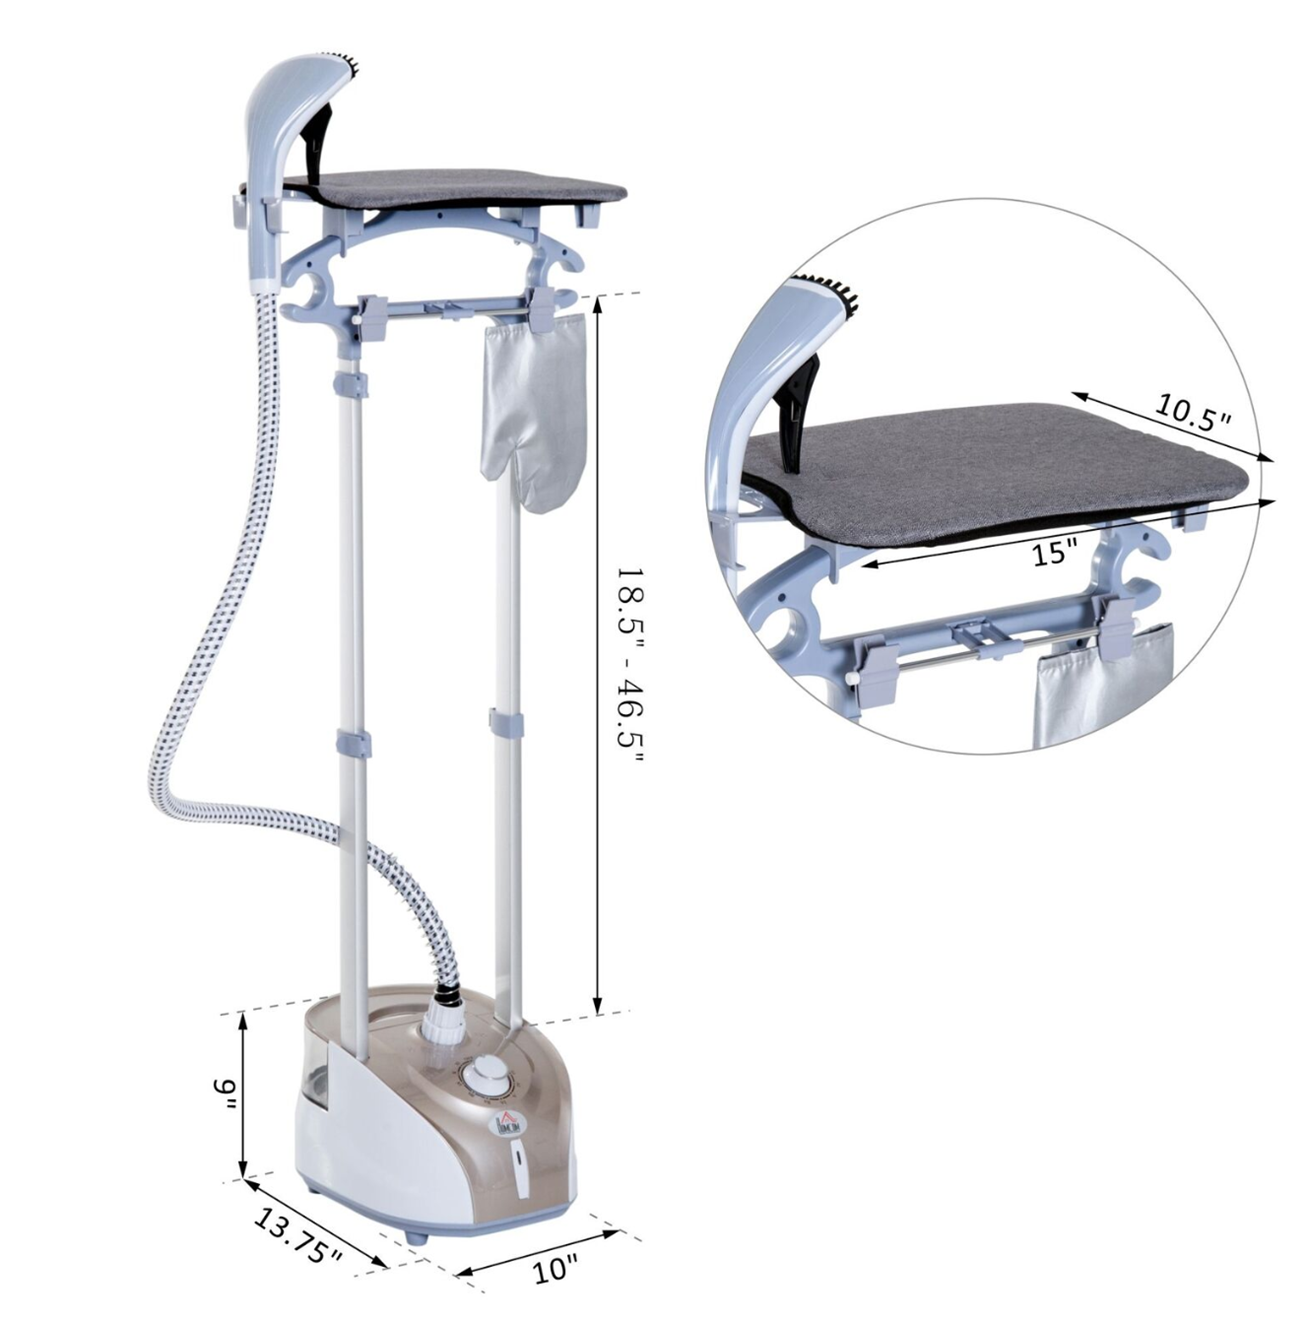 Best Garment Steamer with built in ironing board for ironing all clothes and curtains